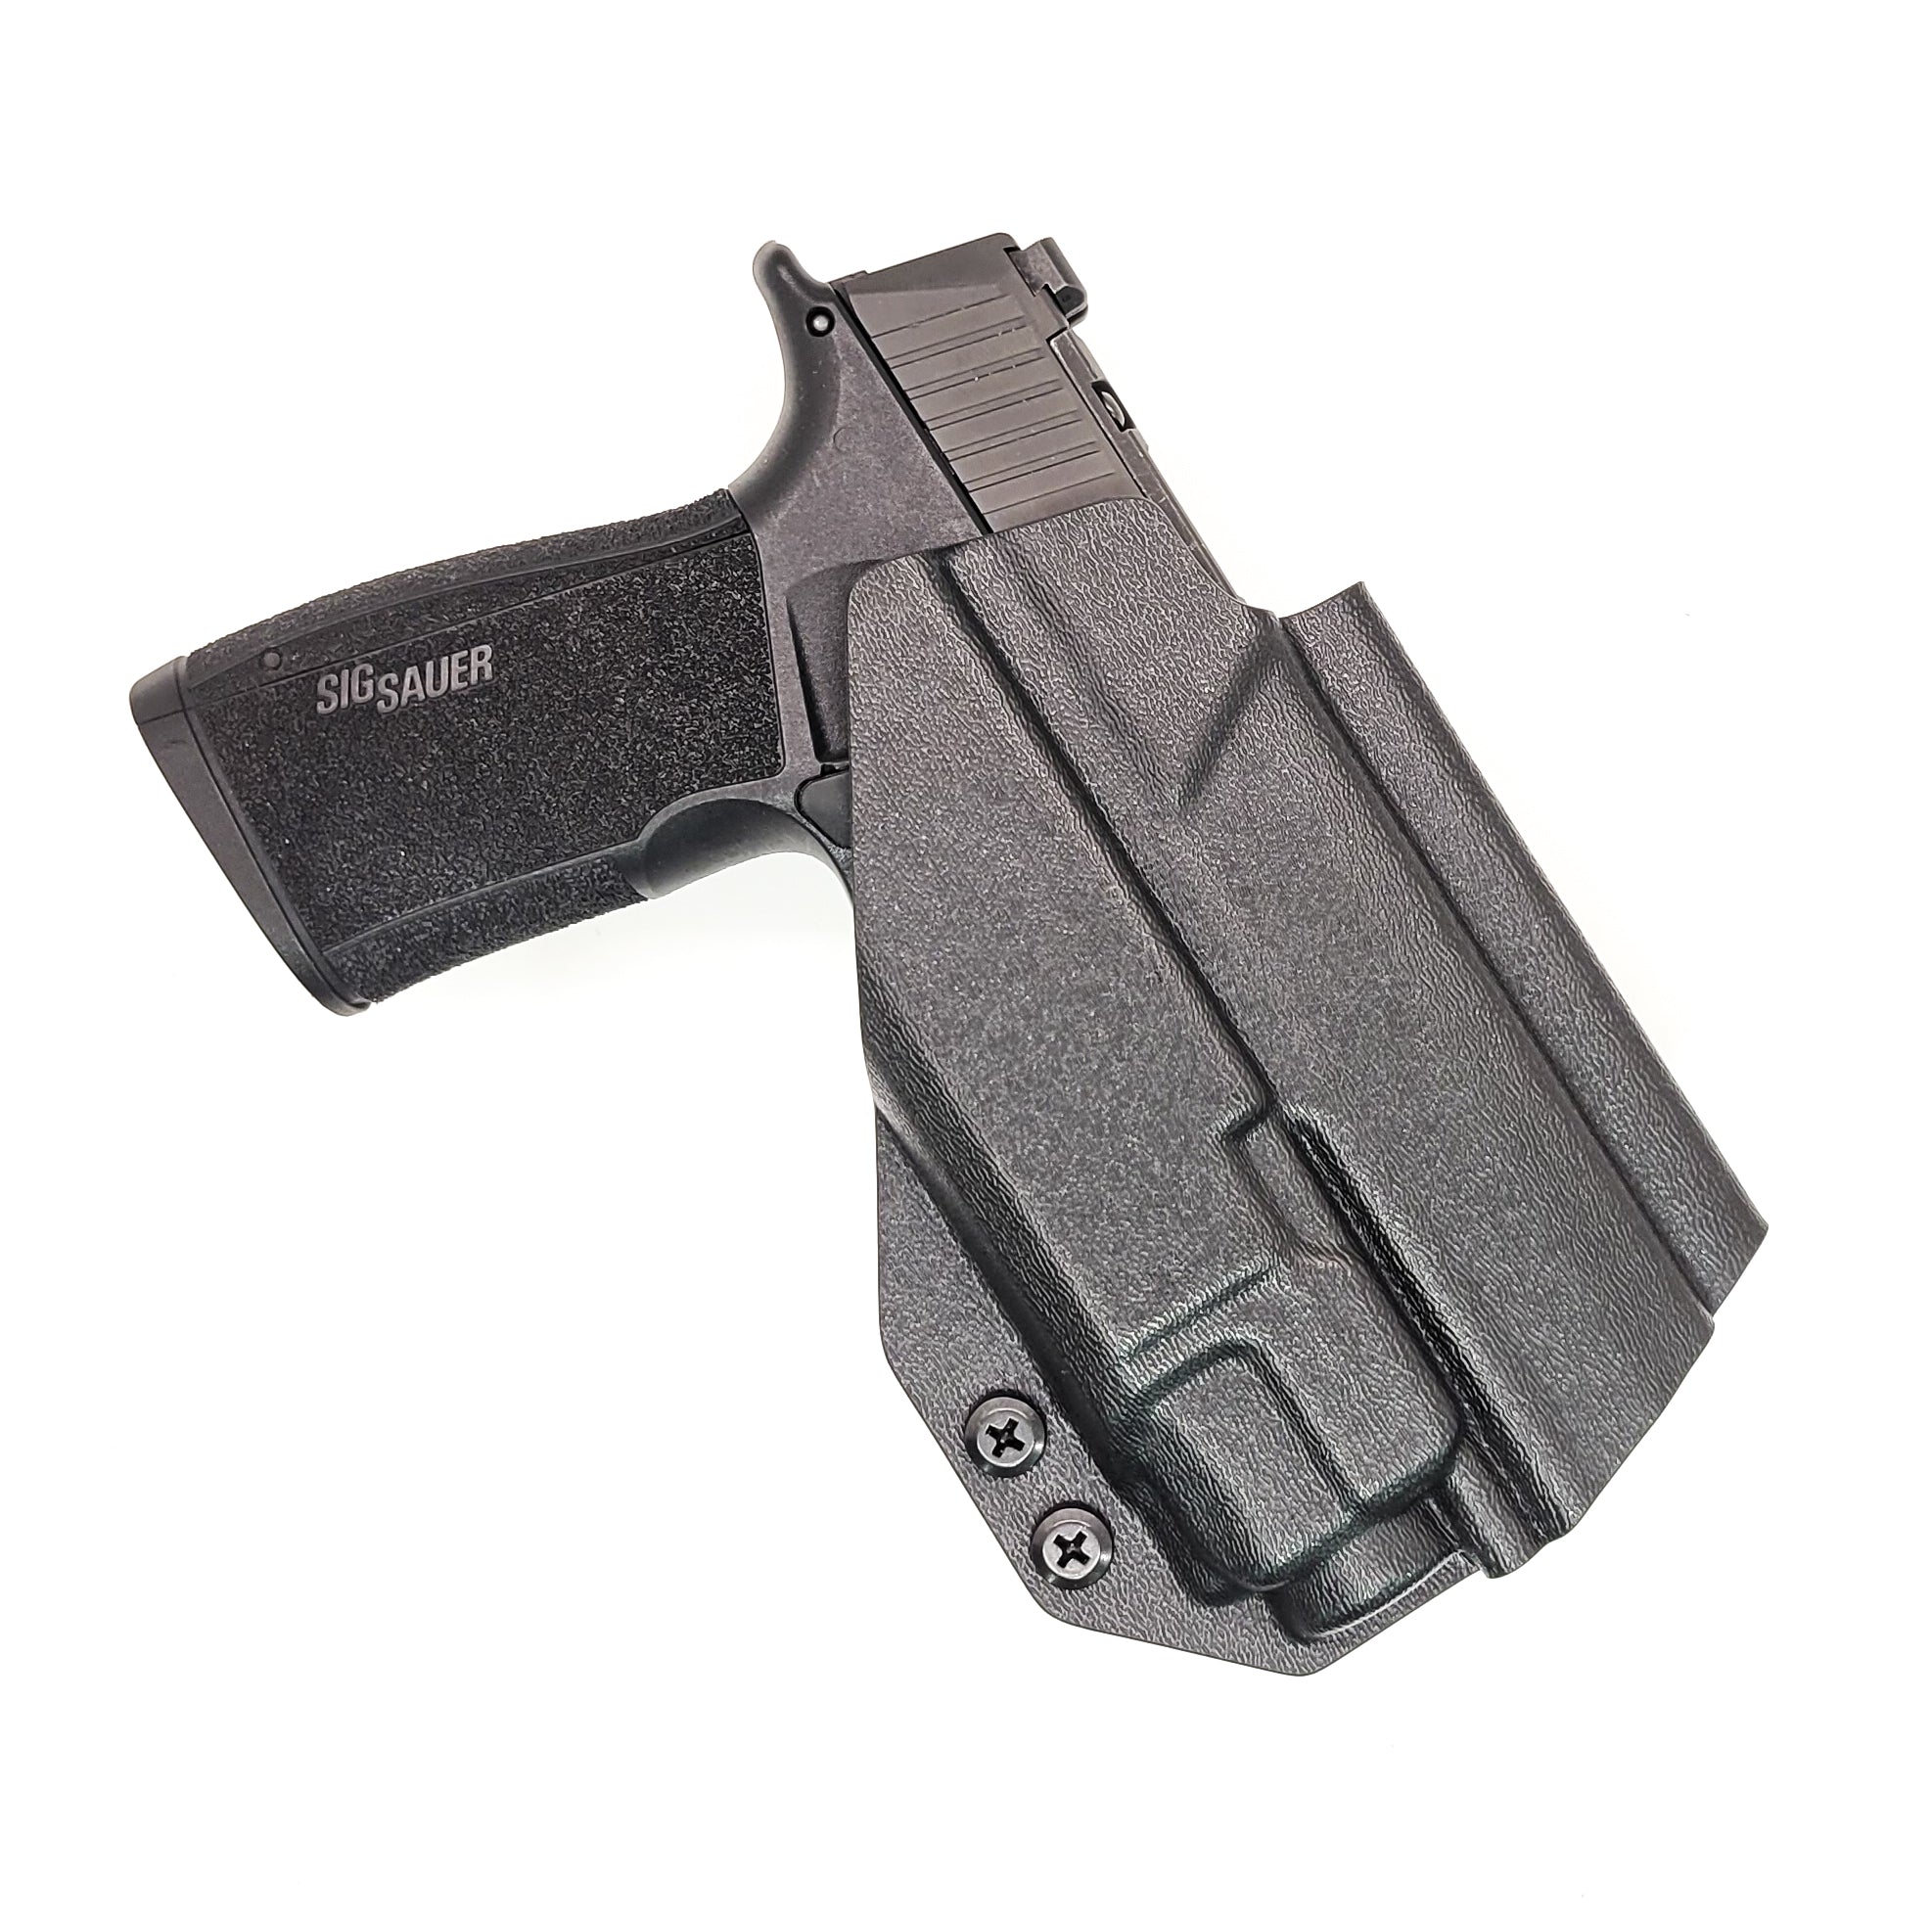 For the best, Outside Waistband OWB Kydex Holster designed for the Sig Sauer P365-XMACRO and Macro Comp with Streamlight TLR-8 A G, shop Four Brothers Holsters. Full sweat guard, adjustable retention, cut for reduced printing. Made in the USA. Open muzzle for threaded barrels, cleared for red dot sights. MACRO